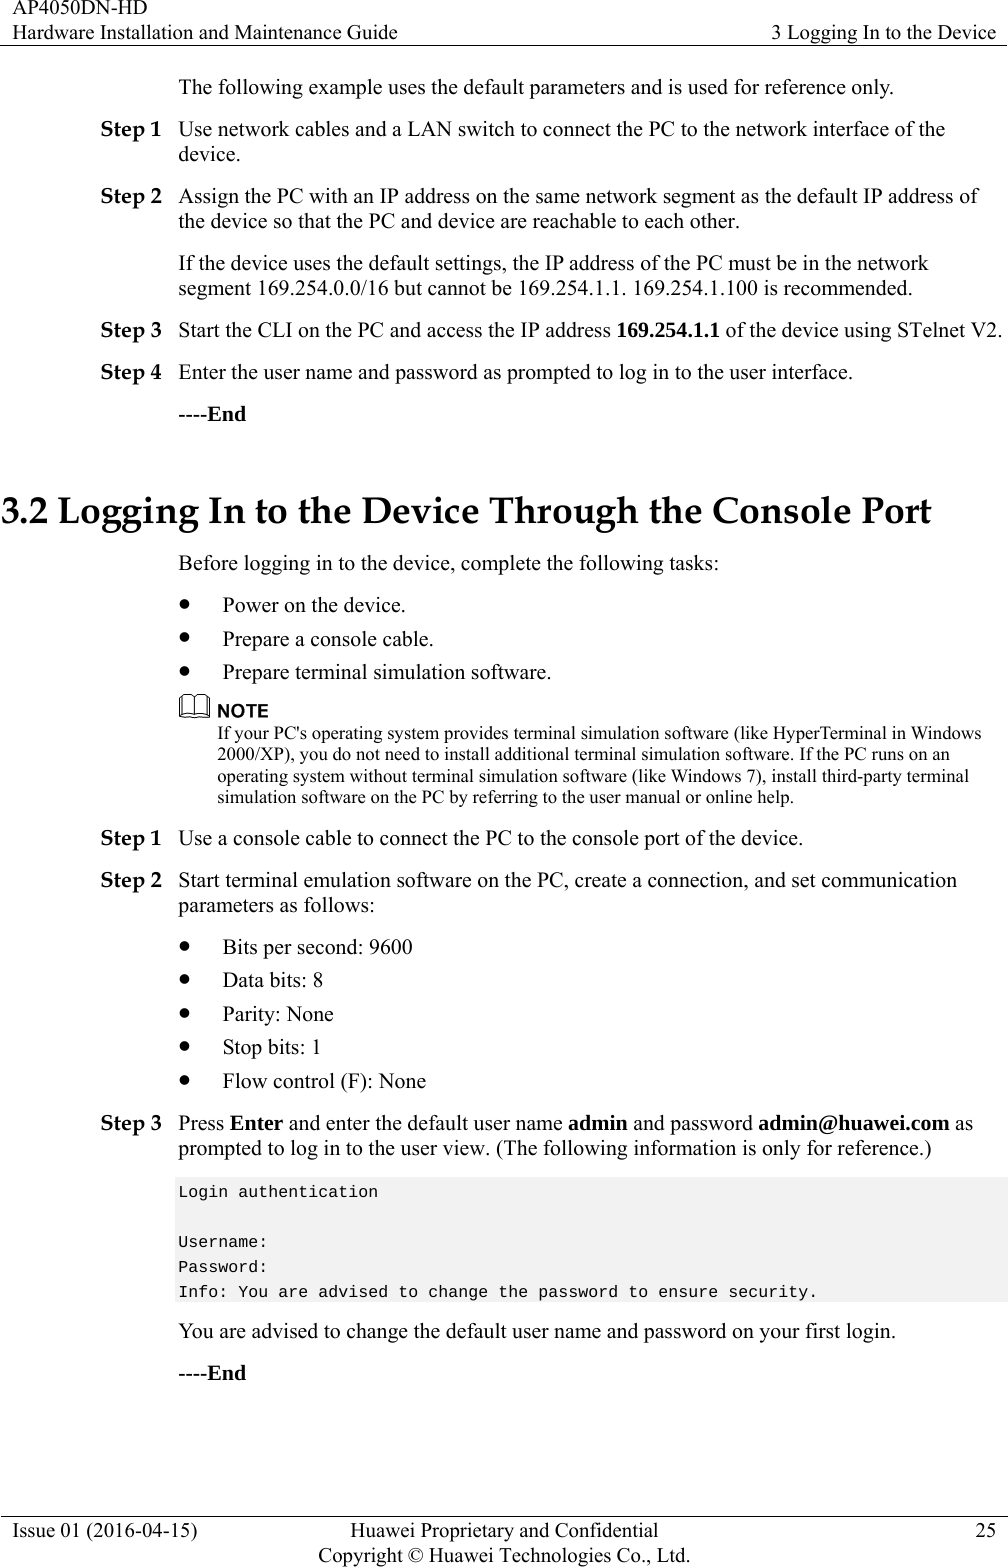 AP4050DN-HD Hardware Installation and Maintenance Guide  3 Logging In to the Device Issue 01 (2016-04-15)  Huawei Proprietary and Confidential         Copyright © Huawei Technologies Co., Ltd.25 The following example uses the default parameters and is used for reference only. Step 1 Use network cables and a LAN switch to connect the PC to the network interface of the device. Step 2 Assign the PC with an IP address on the same network segment as the default IP address of the device so that the PC and device are reachable to each other. If the device uses the default settings, the IP address of the PC must be in the network segment 169.254.0.0/16 but cannot be 169.254.1.1. 169.254.1.100 is recommended. Step 3 Start the CLI on the PC and access the IP address 169.254.1.1 of the device using STelnet V2. Step 4 Enter the user name and password as prompted to log in to the user interface. ----End 3.2 Logging In to the Device Through the Console Port Before logging in to the device, complete the following tasks:  Power on the device.  Prepare a console cable.  Prepare terminal simulation software.  If your PC&apos;s operating system provides terminal simulation software (like HyperTerminal in Windows 2000/XP), you do not need to install additional terminal simulation software. If the PC runs on an operating system without terminal simulation software (like Windows 7), install third-party terminal simulation software on the PC by referring to the user manual or online help. Step 1 Use a console cable to connect the PC to the console port of the device. Step 2 Start terminal emulation software on the PC, create a connection, and set communication parameters as follows:  Bits per second: 9600  Data bits: 8  Parity: None  Stop bits: 1  Flow control (F): None Step 3 Press Enter and enter the default user name admin and password admin@huawei.com as prompted to log in to the user view. (The following information is only for reference.) Login authentication    Username:  Password:  Info: You are advised to change the password to ensure security. You are advised to change the default user name and password on your first login. ----End 